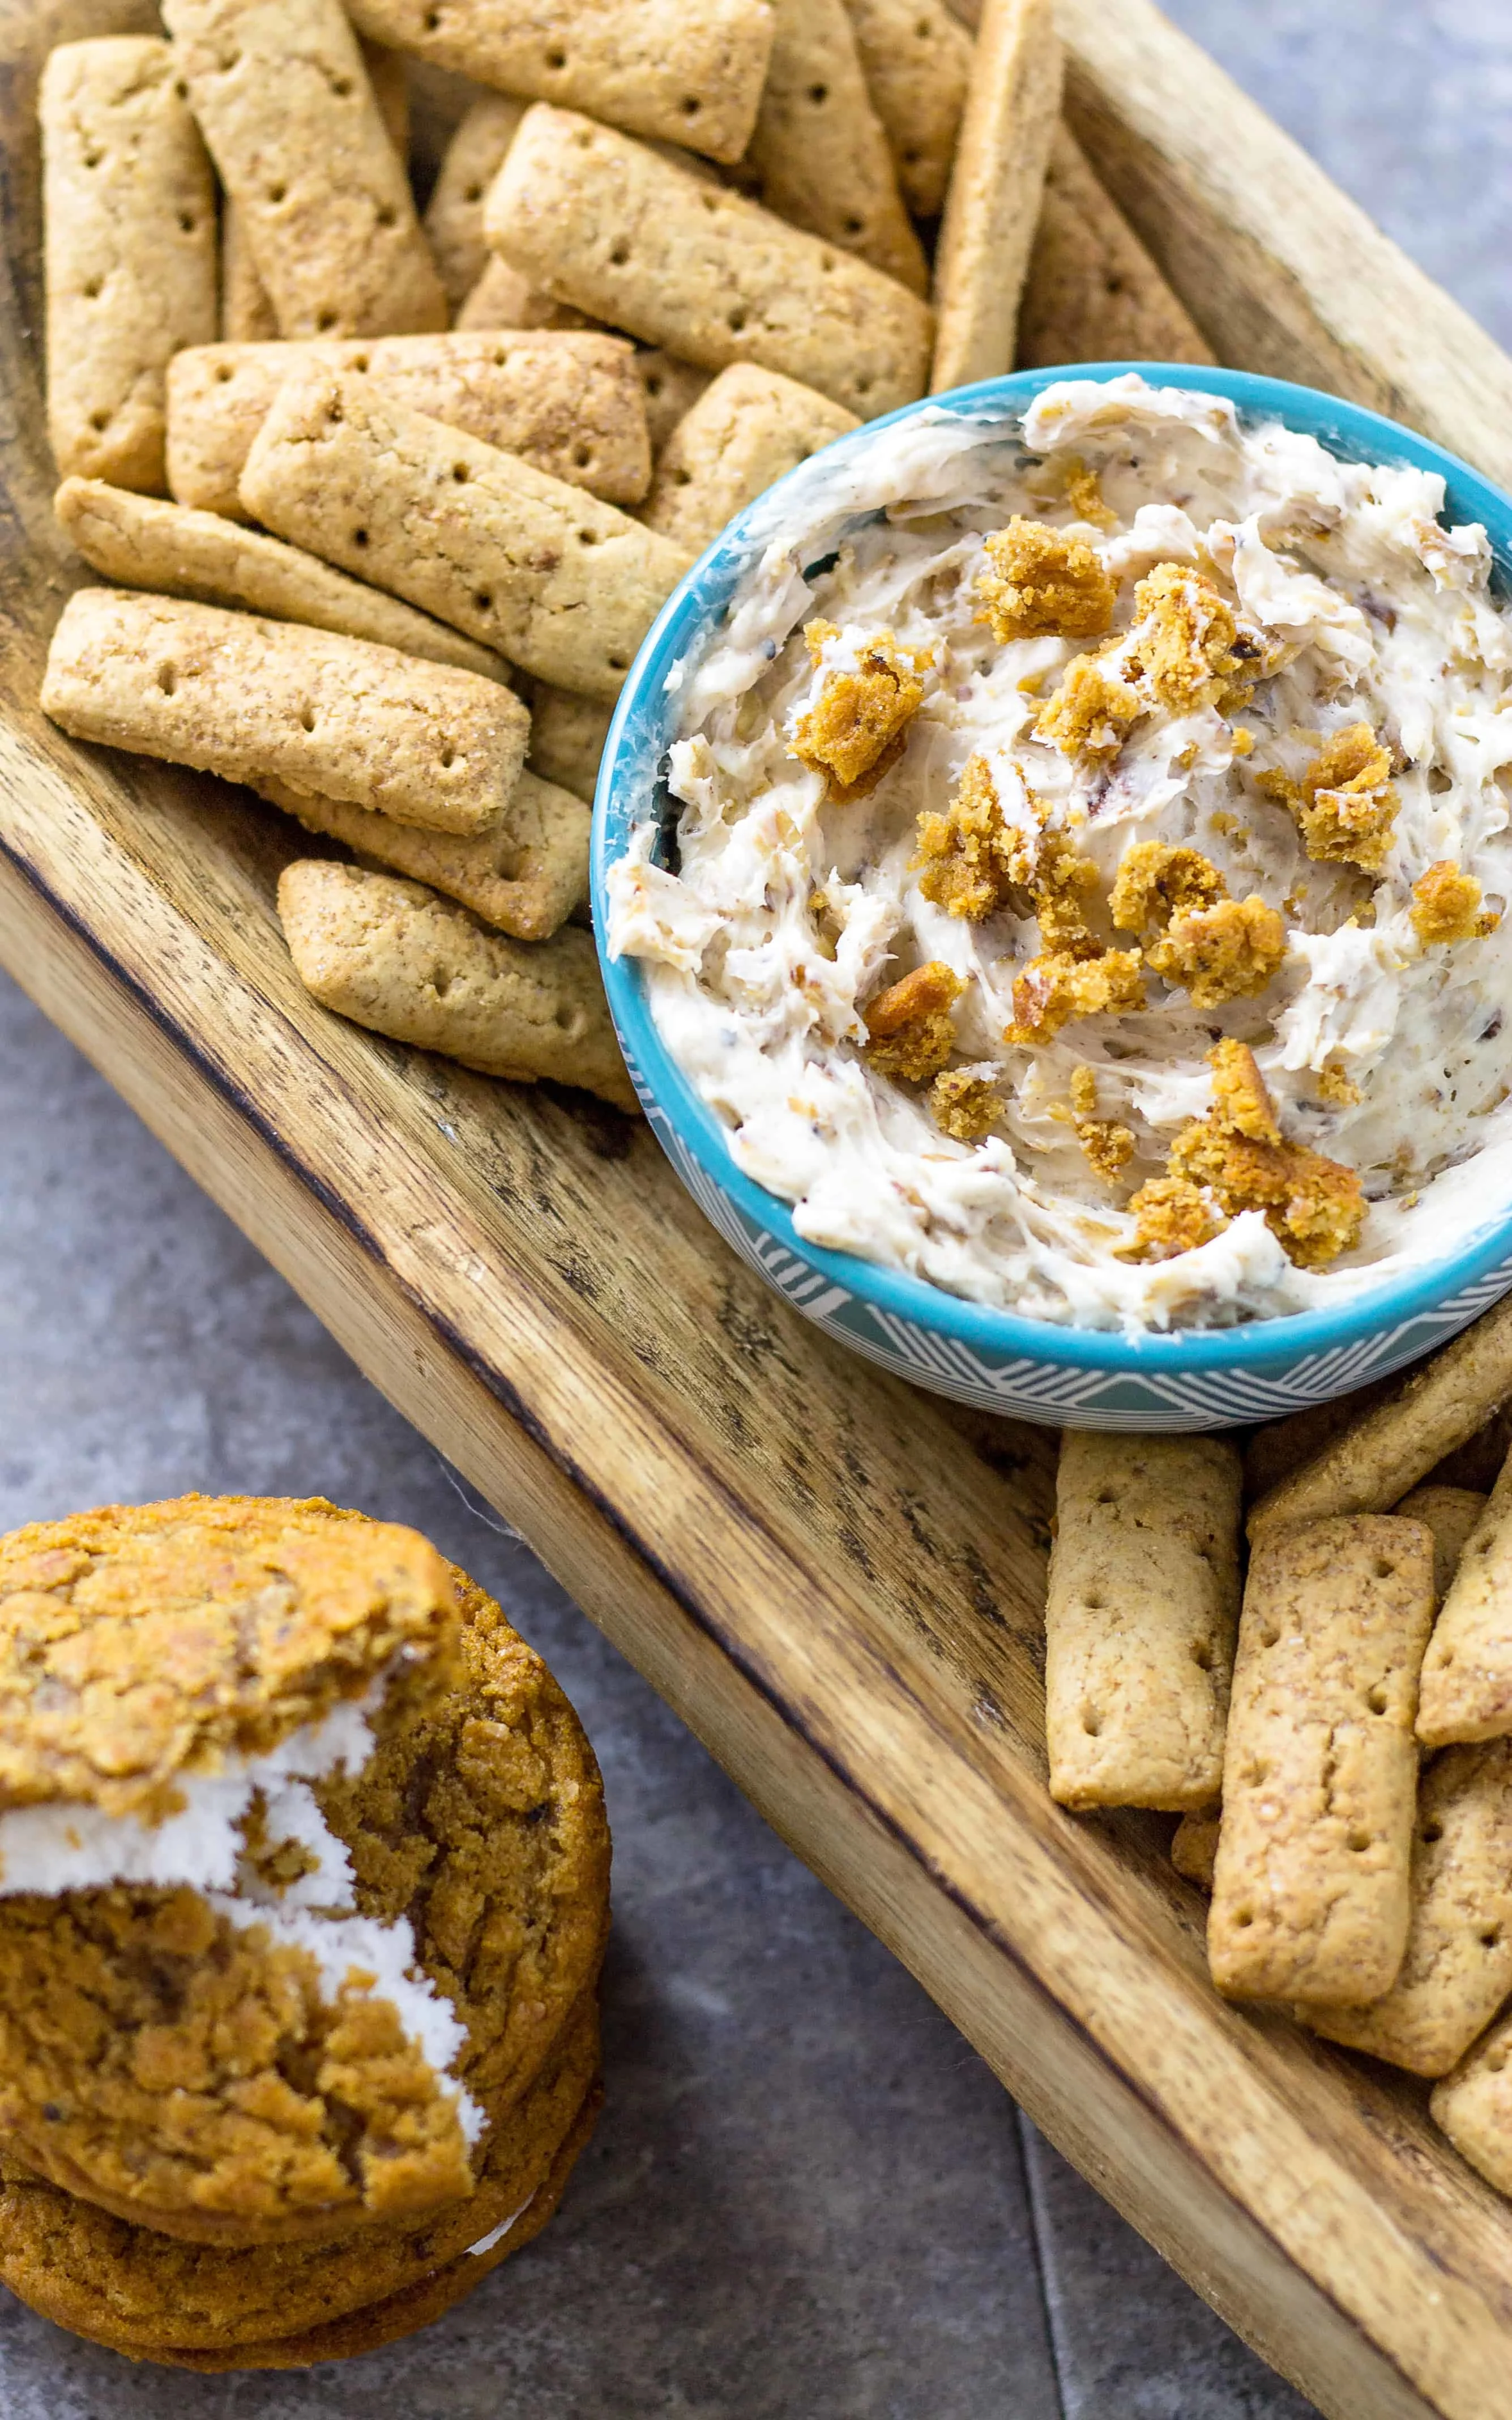 Even as an adult I can't resist snack cakes. Maybe this Oatmeal Cream Pie Dip will help | Take Two Tapas | #OatmealCreamPeDip #OatmealCreamPie #SweetDips #Dips